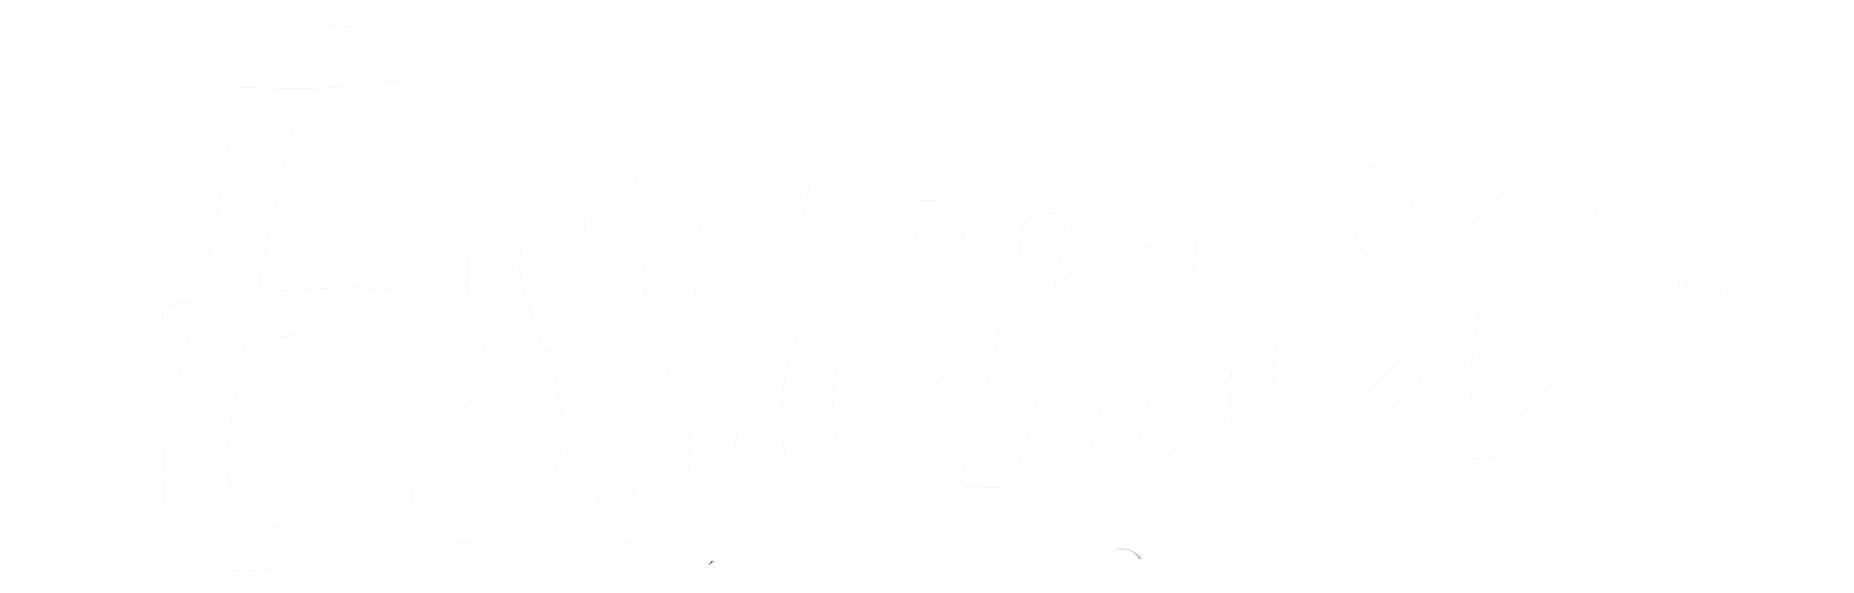 essence-white.png